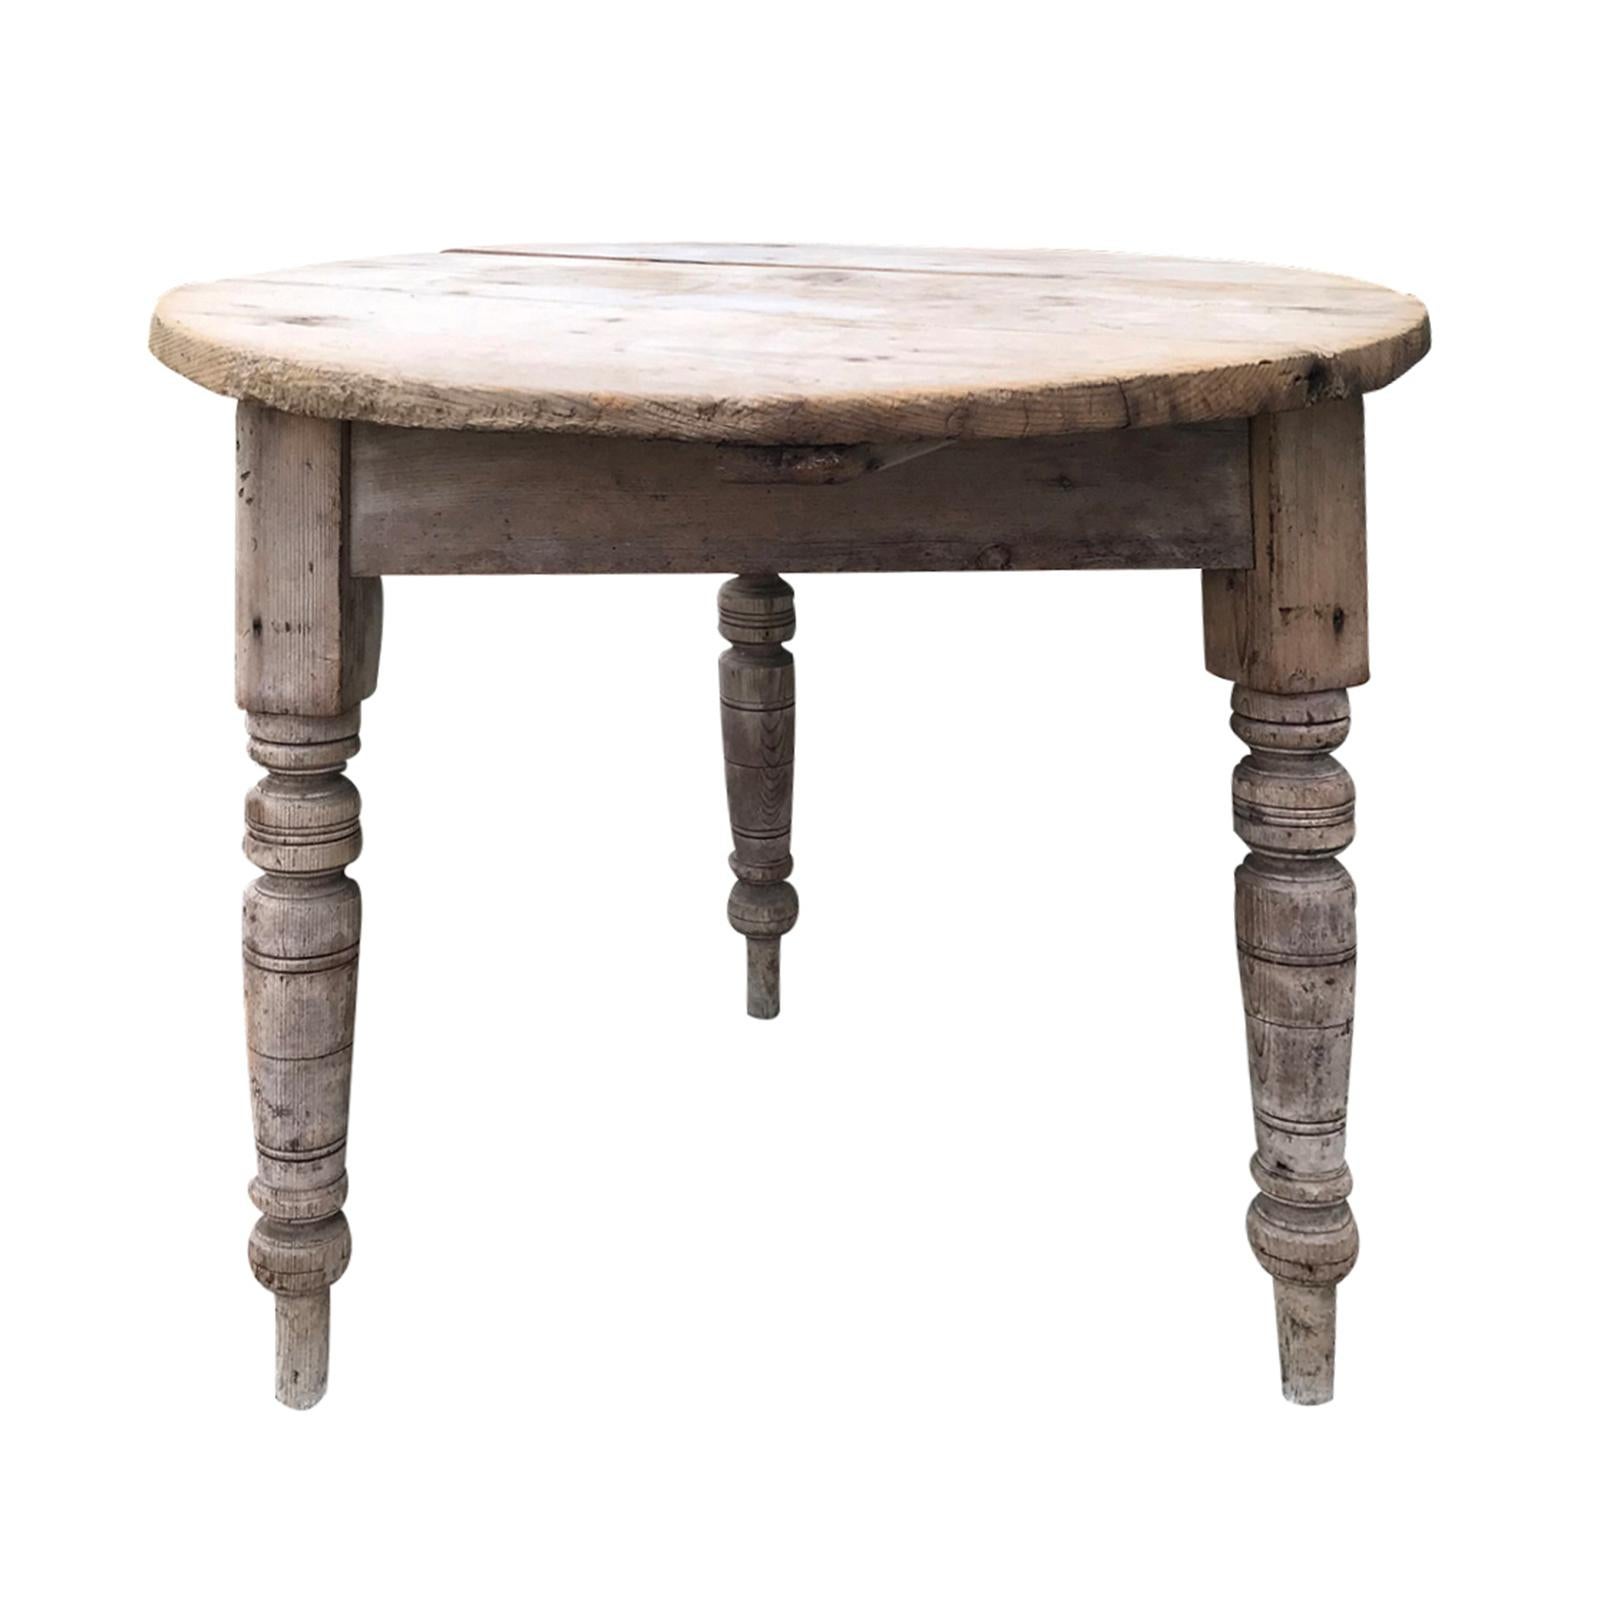 19th Century Round Pine Pub Table with Old Bleached Finish